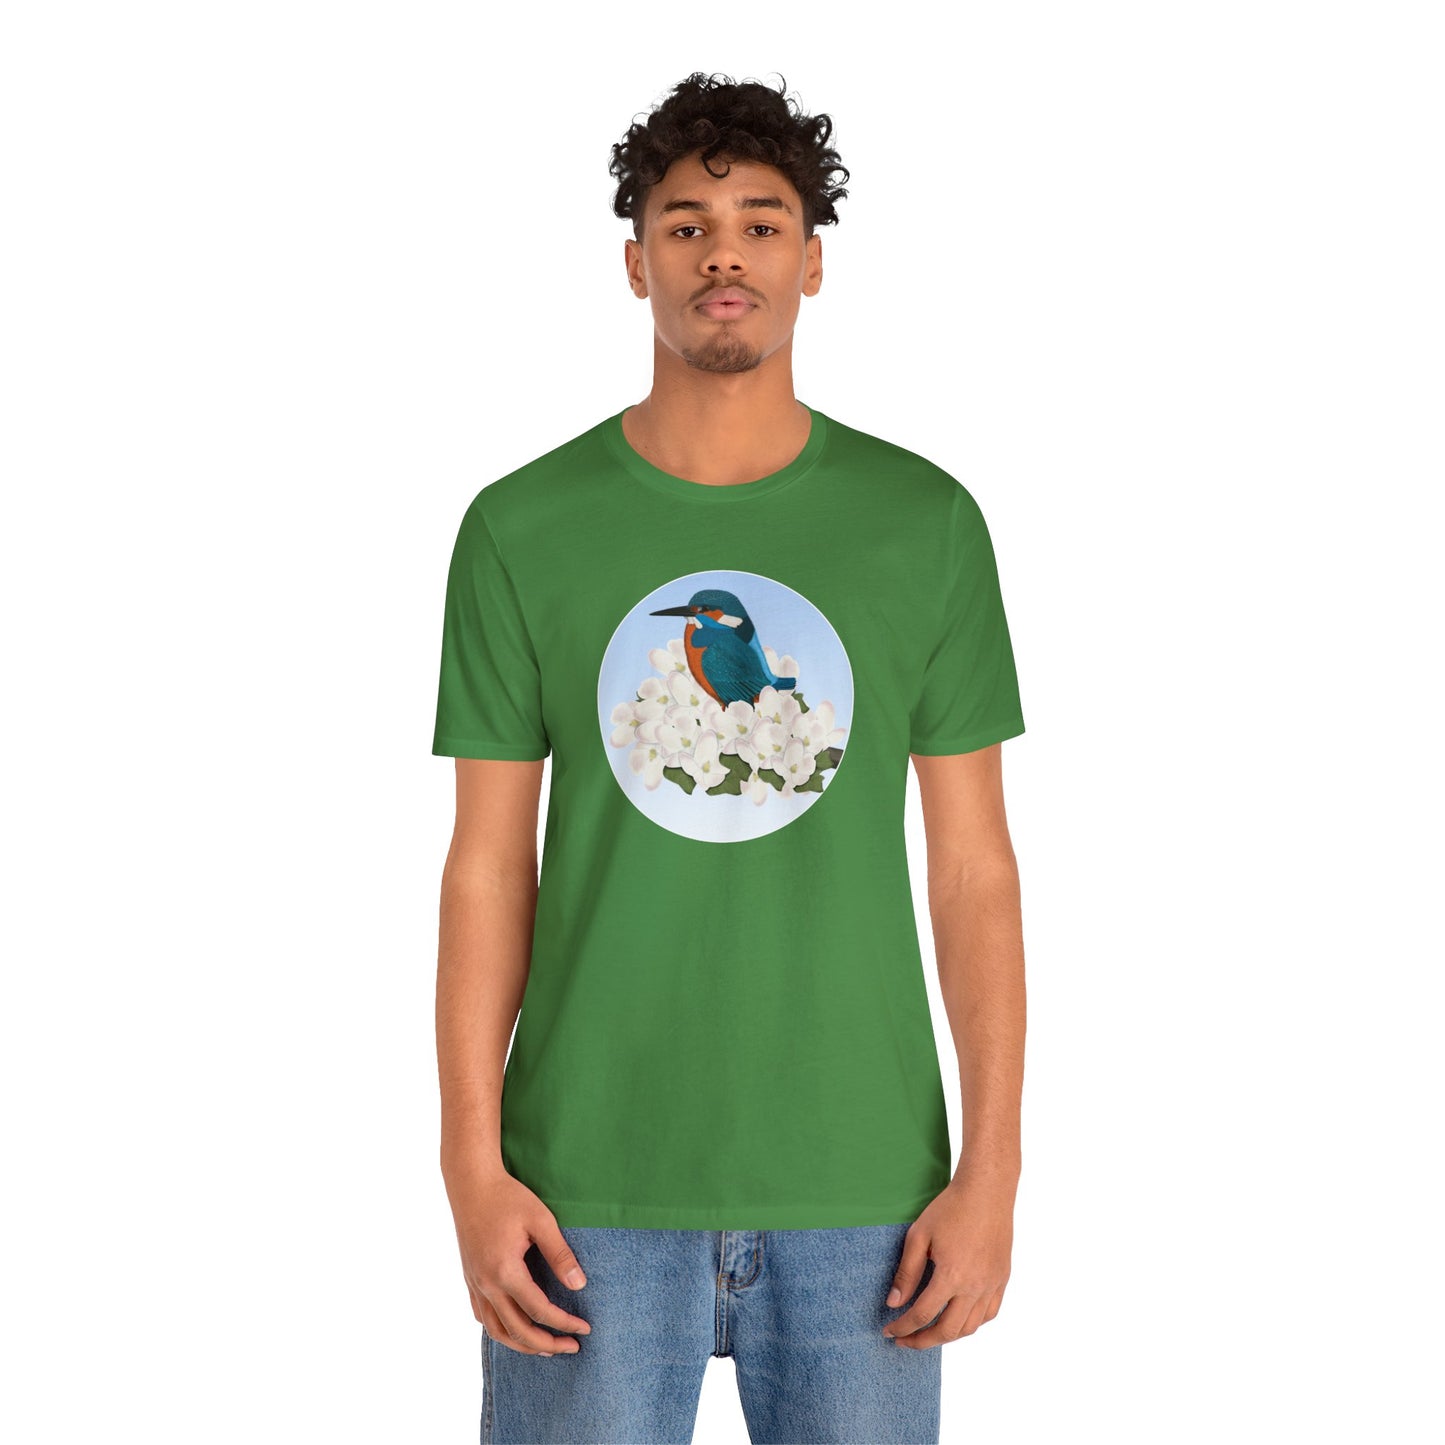 Kingfisher and Spring Apple Blossoms Bird T-Shirt